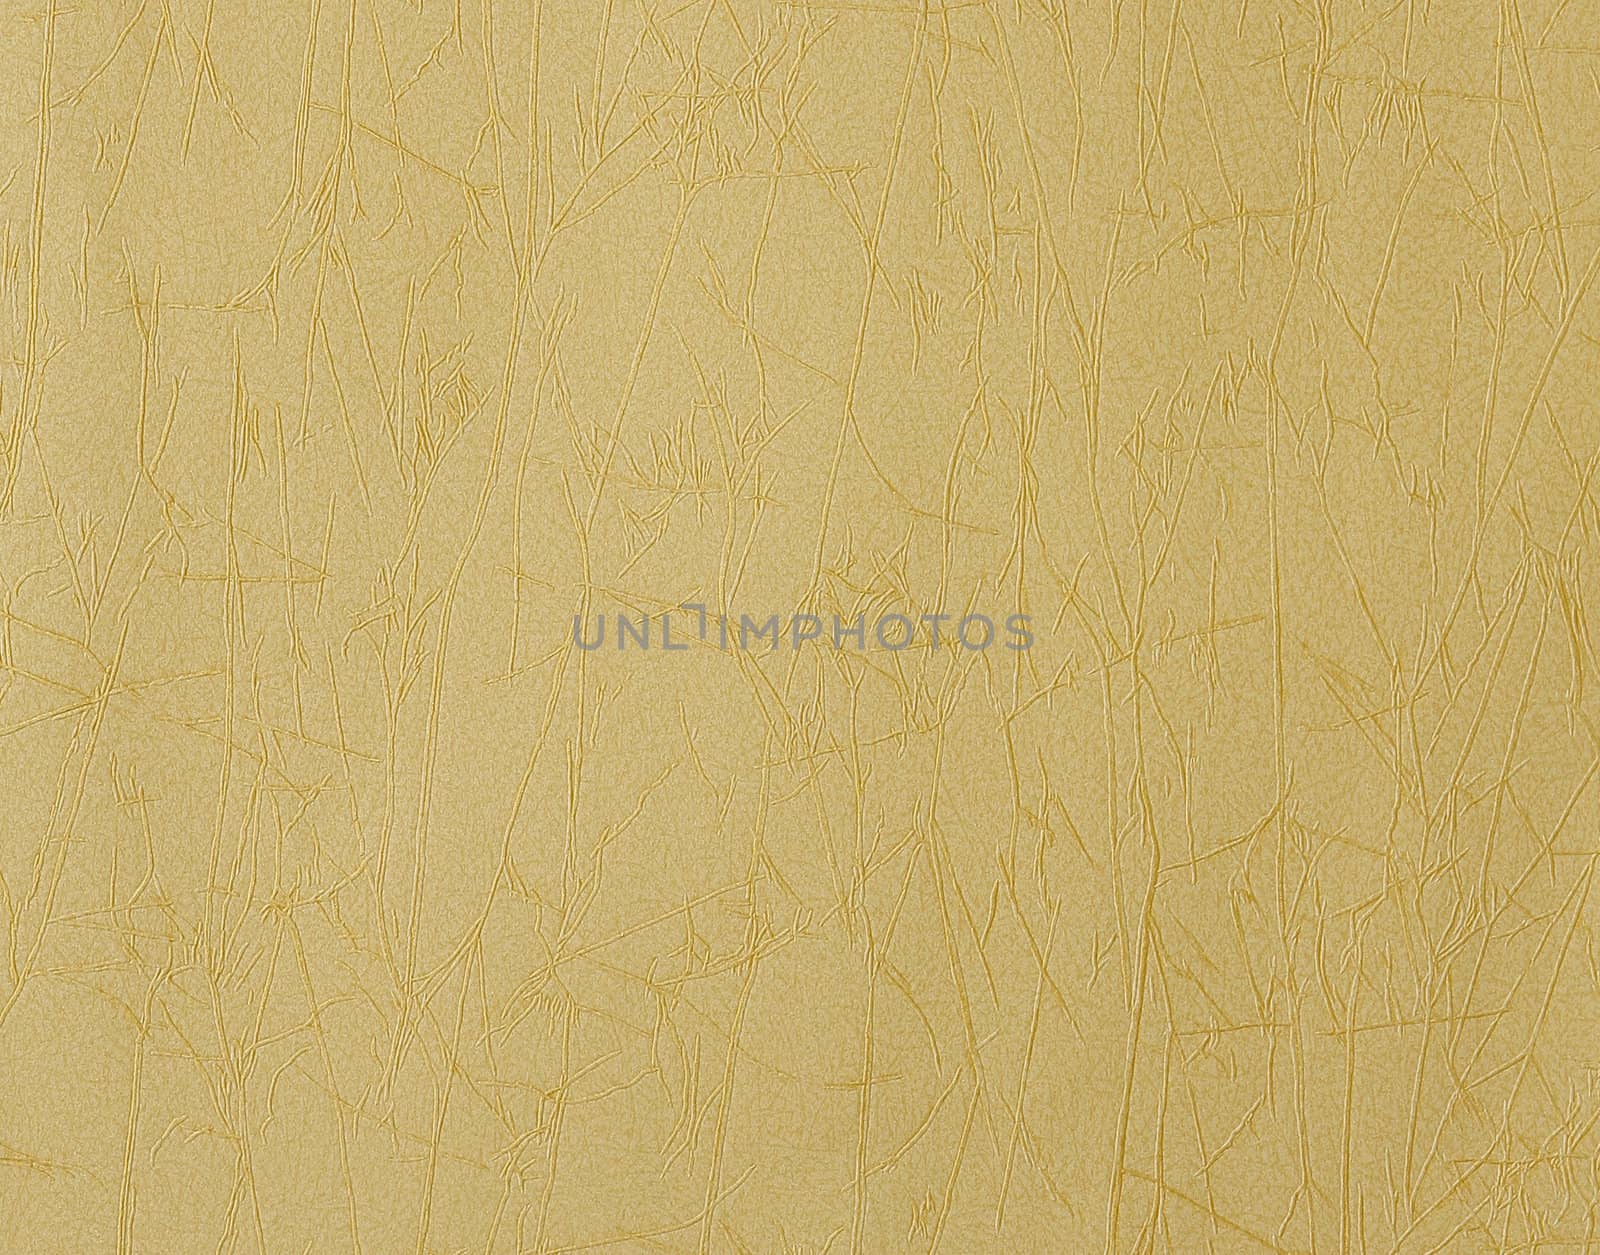 Abstract background with long stripes in gold